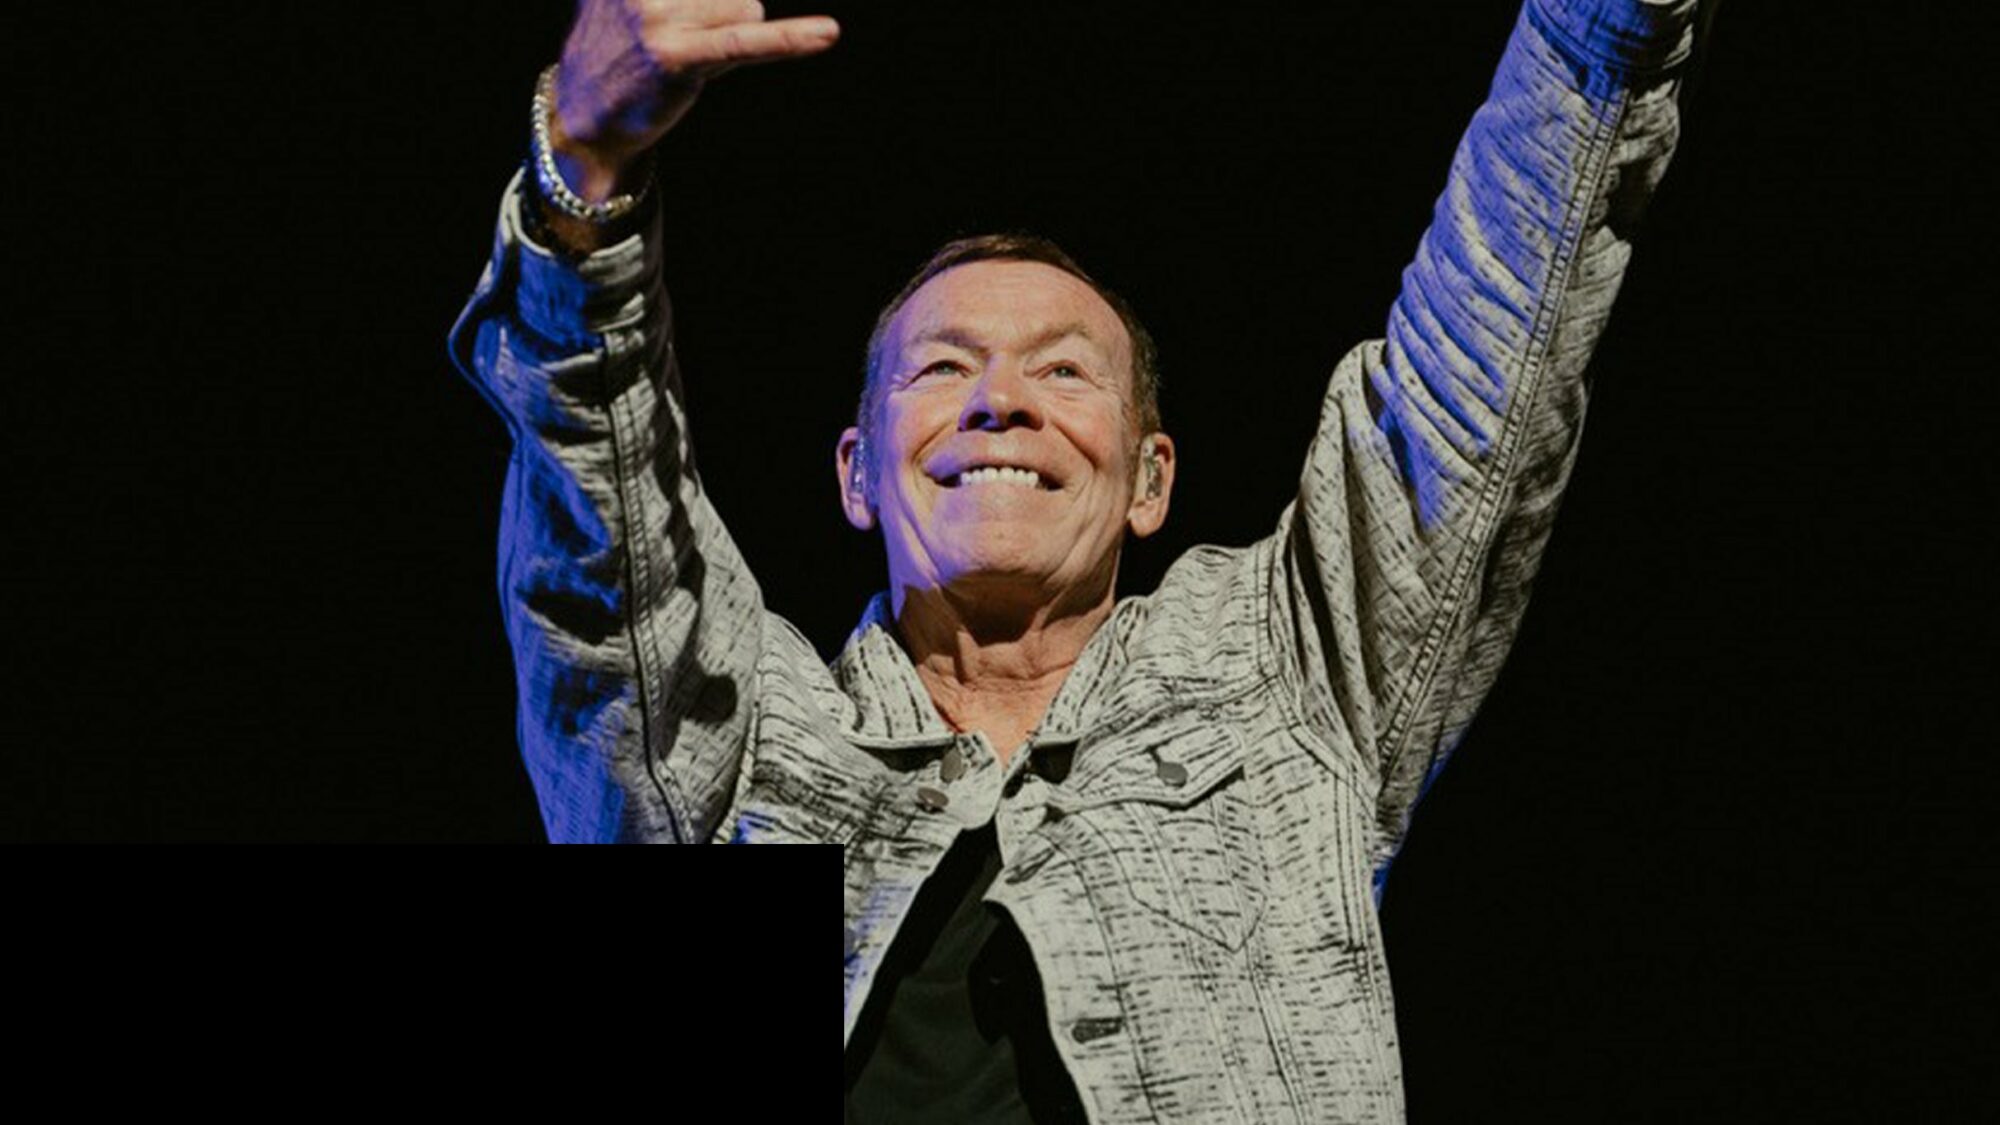 Image name UB40 Featuring Ali Campbell at Bridlington Spa Centre Bridlington the 2 image from the post UB40 Featuring Ali Campbell at Bridlington Spa Centre, Bridlington in Yorkshire.com.